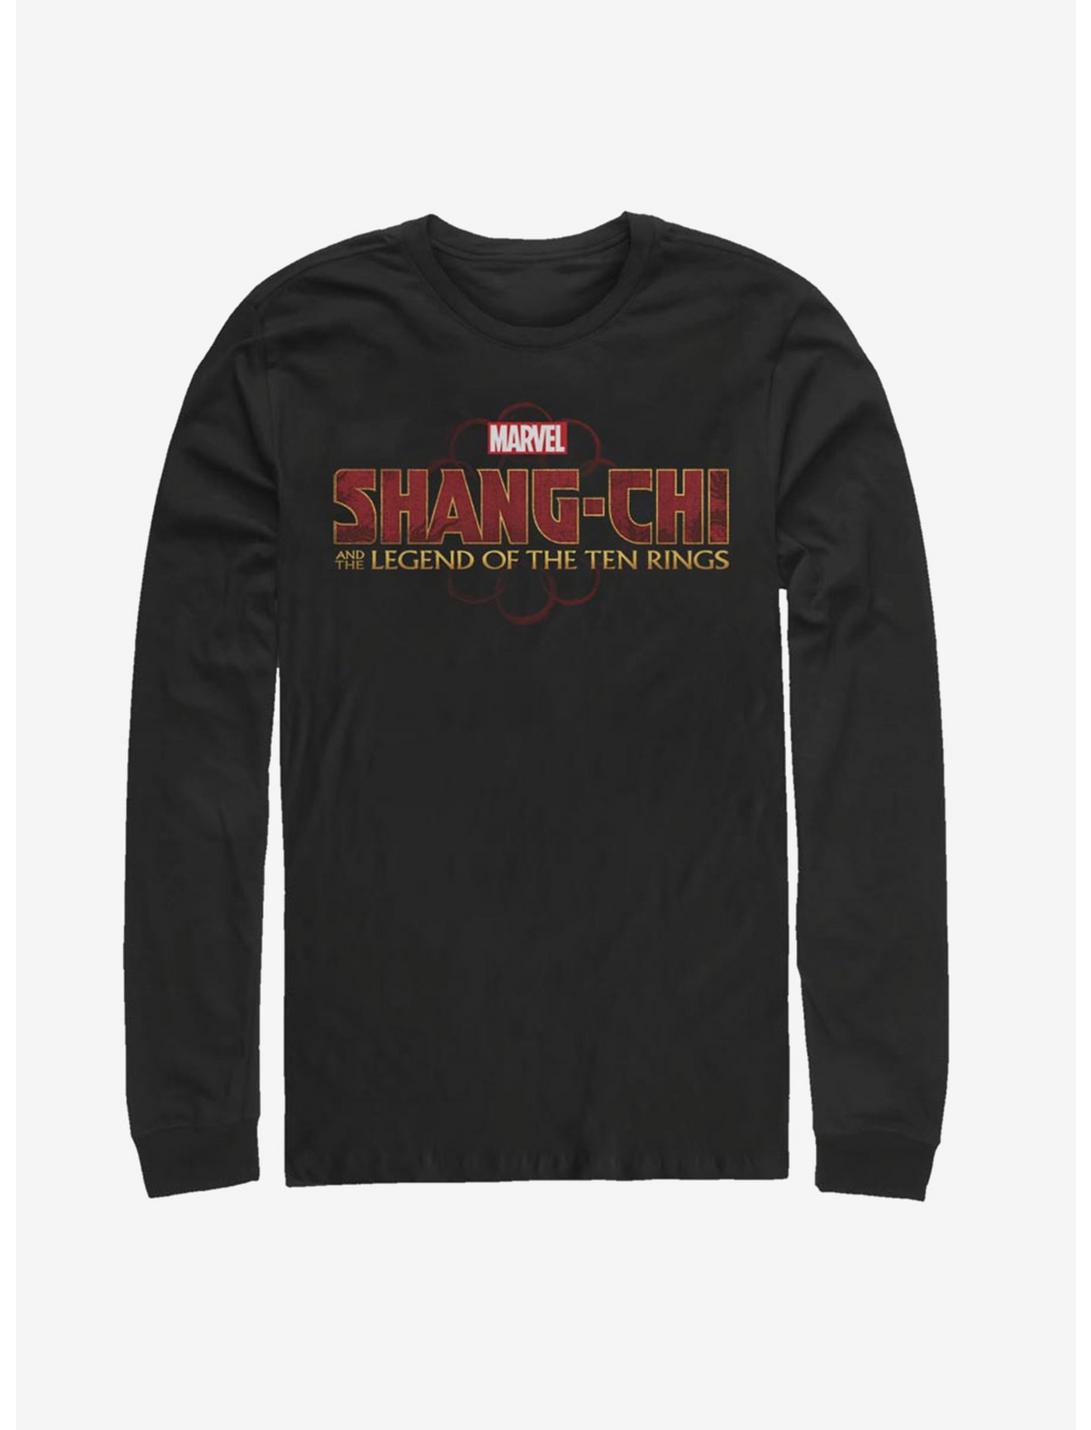 Marvel Shang-Chi And The Legend Of The Ten Rings Long-Sleeve T-Shirt, BLACK, hi-res